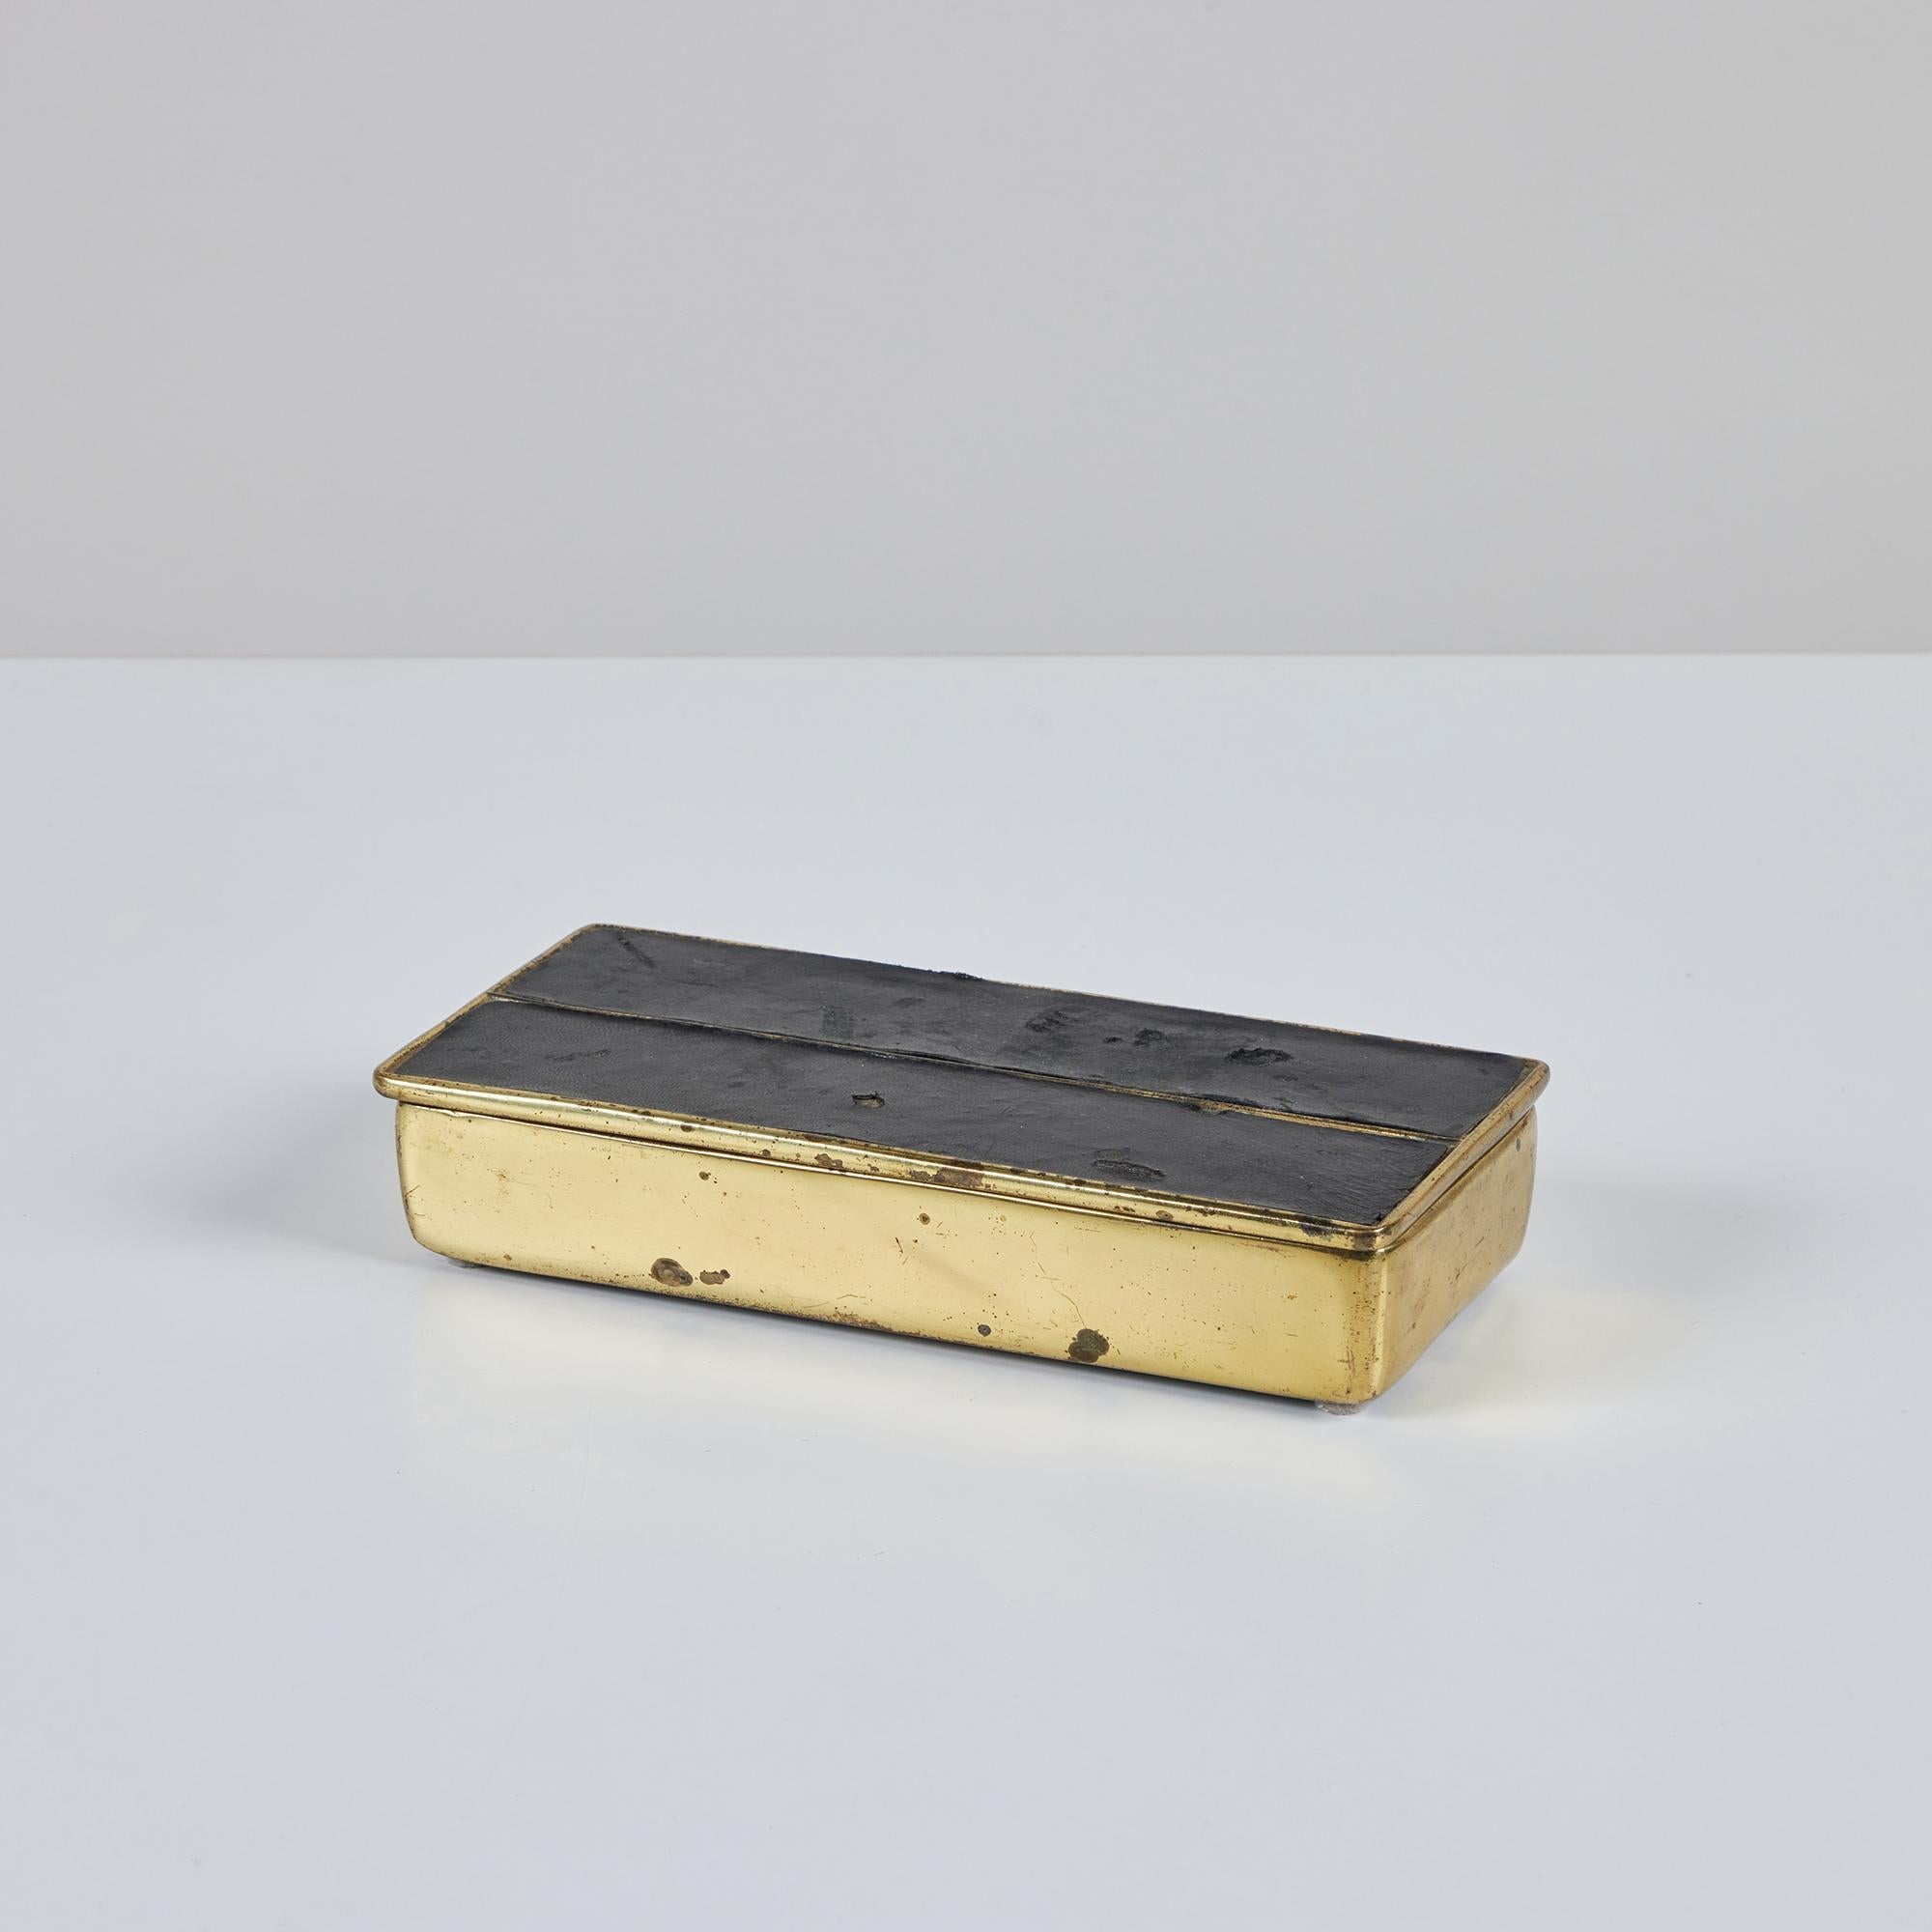 From the popular Jenfred-Ware line, designed by Ben Seibel in 1948 and retailed by Raymor, a rectangular bass box, aged black leather and brass lid.

Dimensions
8.25